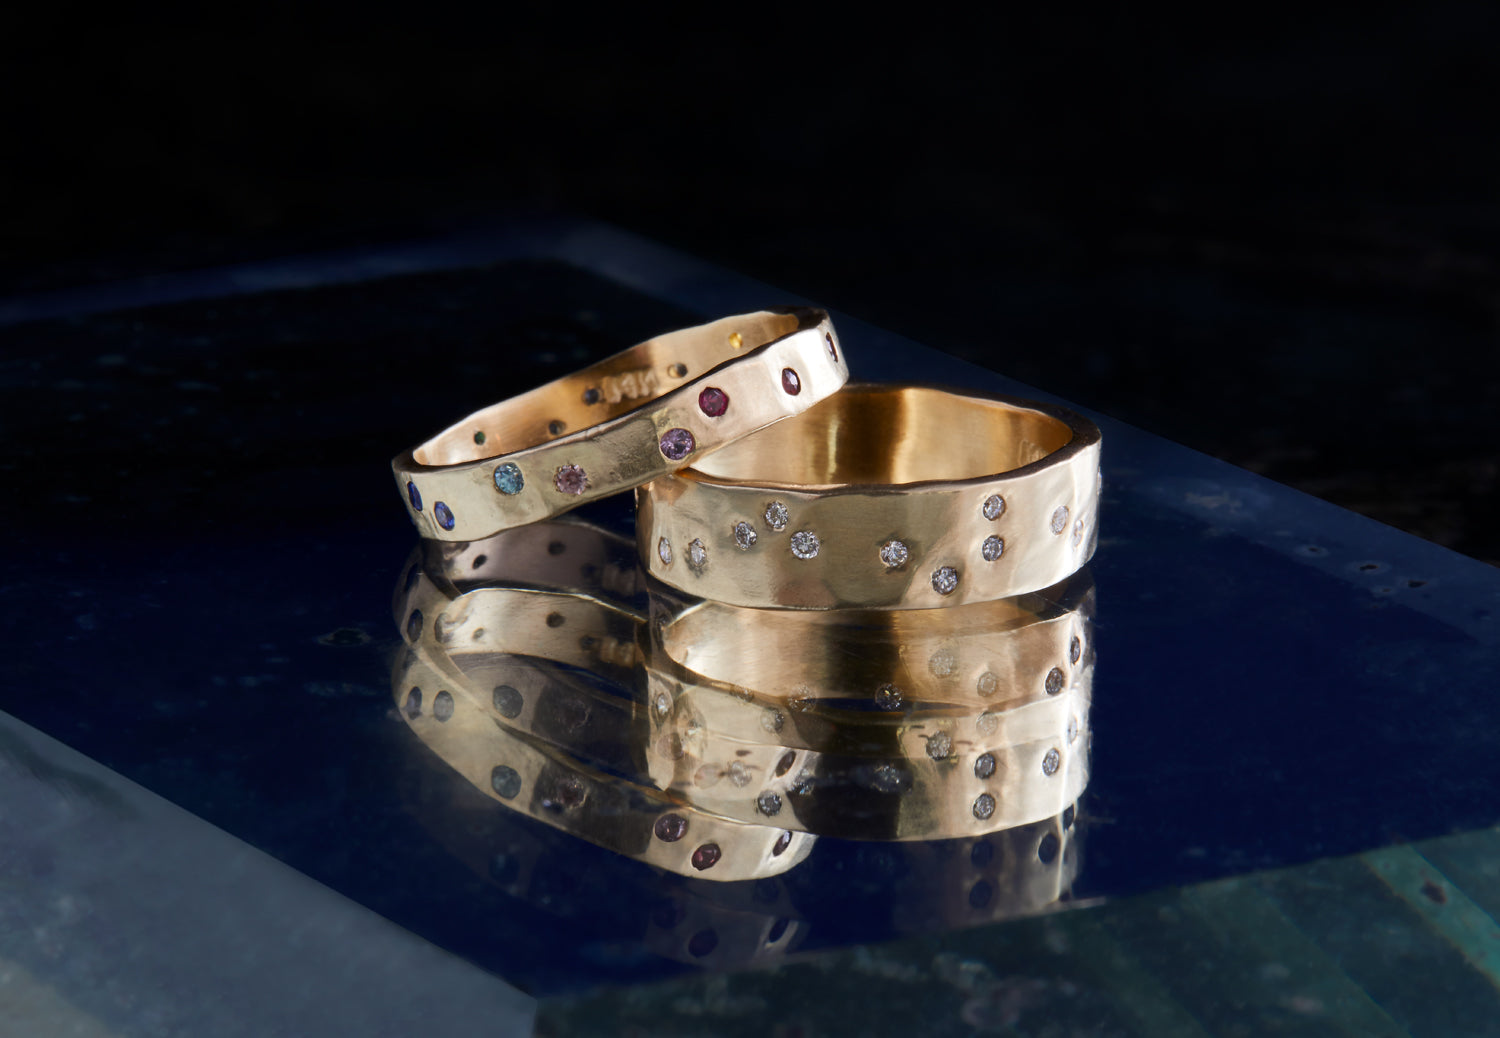 The Wide Constellation Band showcases 14 diamonds scattered across the front of a wide hammered band.